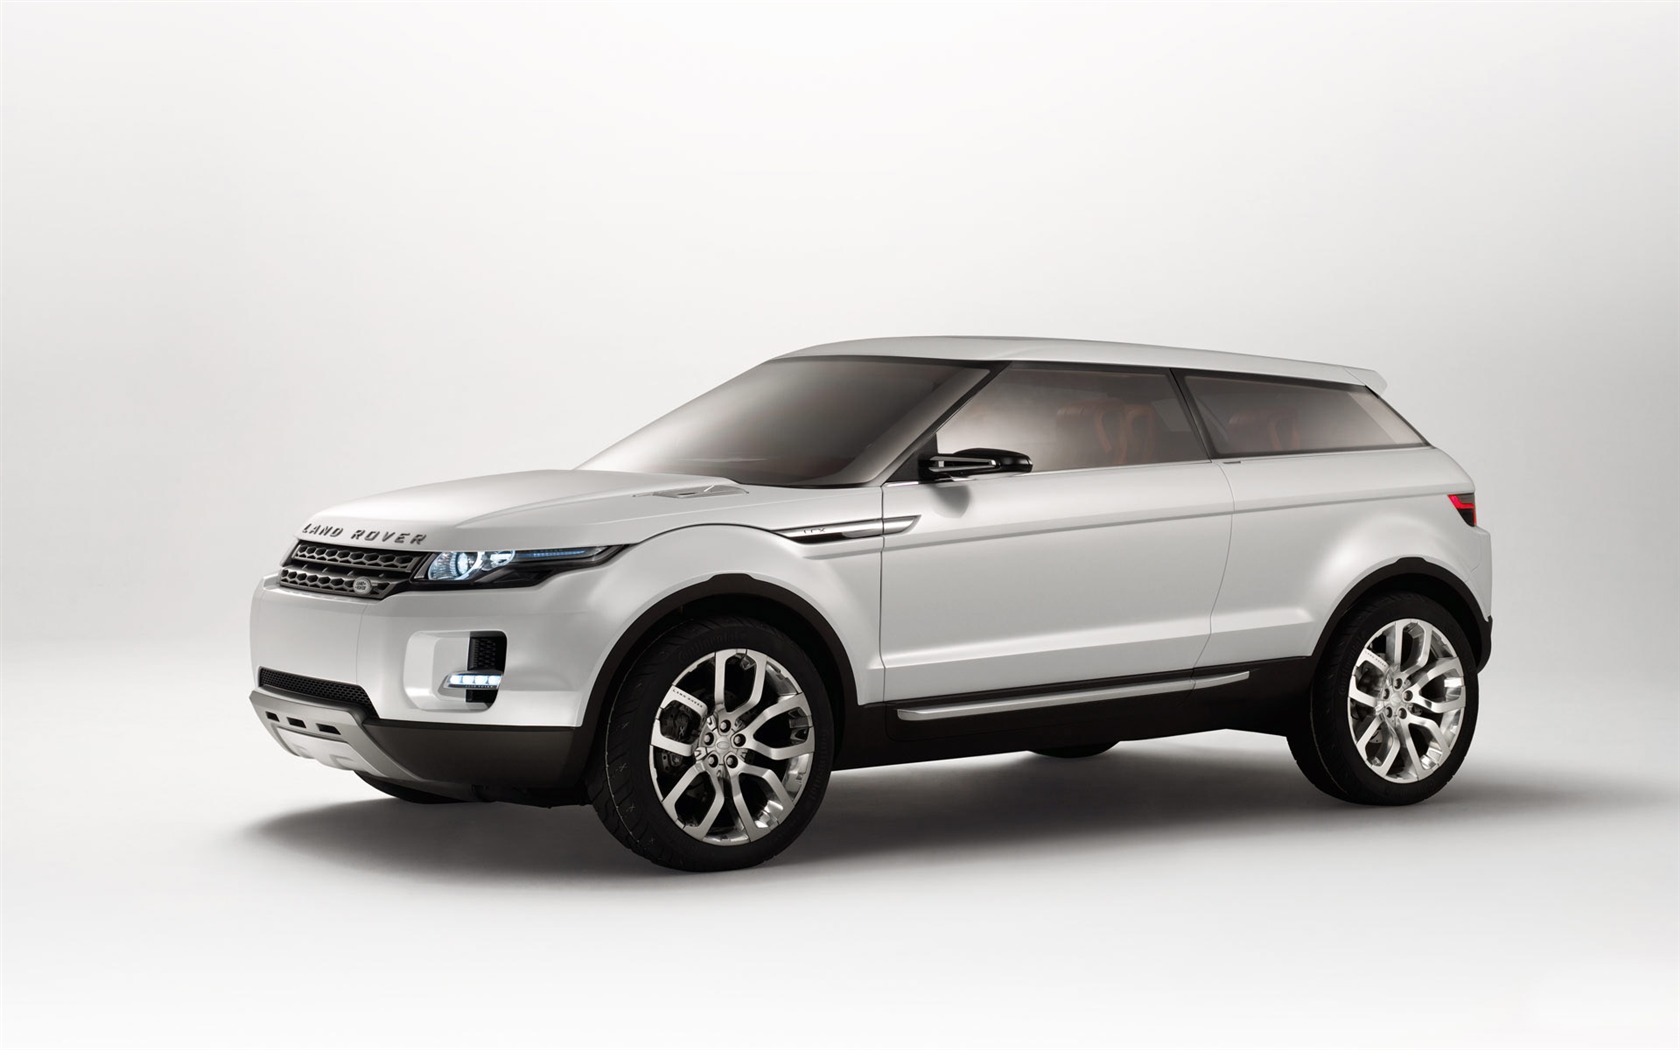 Land Rover Wallpapers Album #7 - 1680x1050